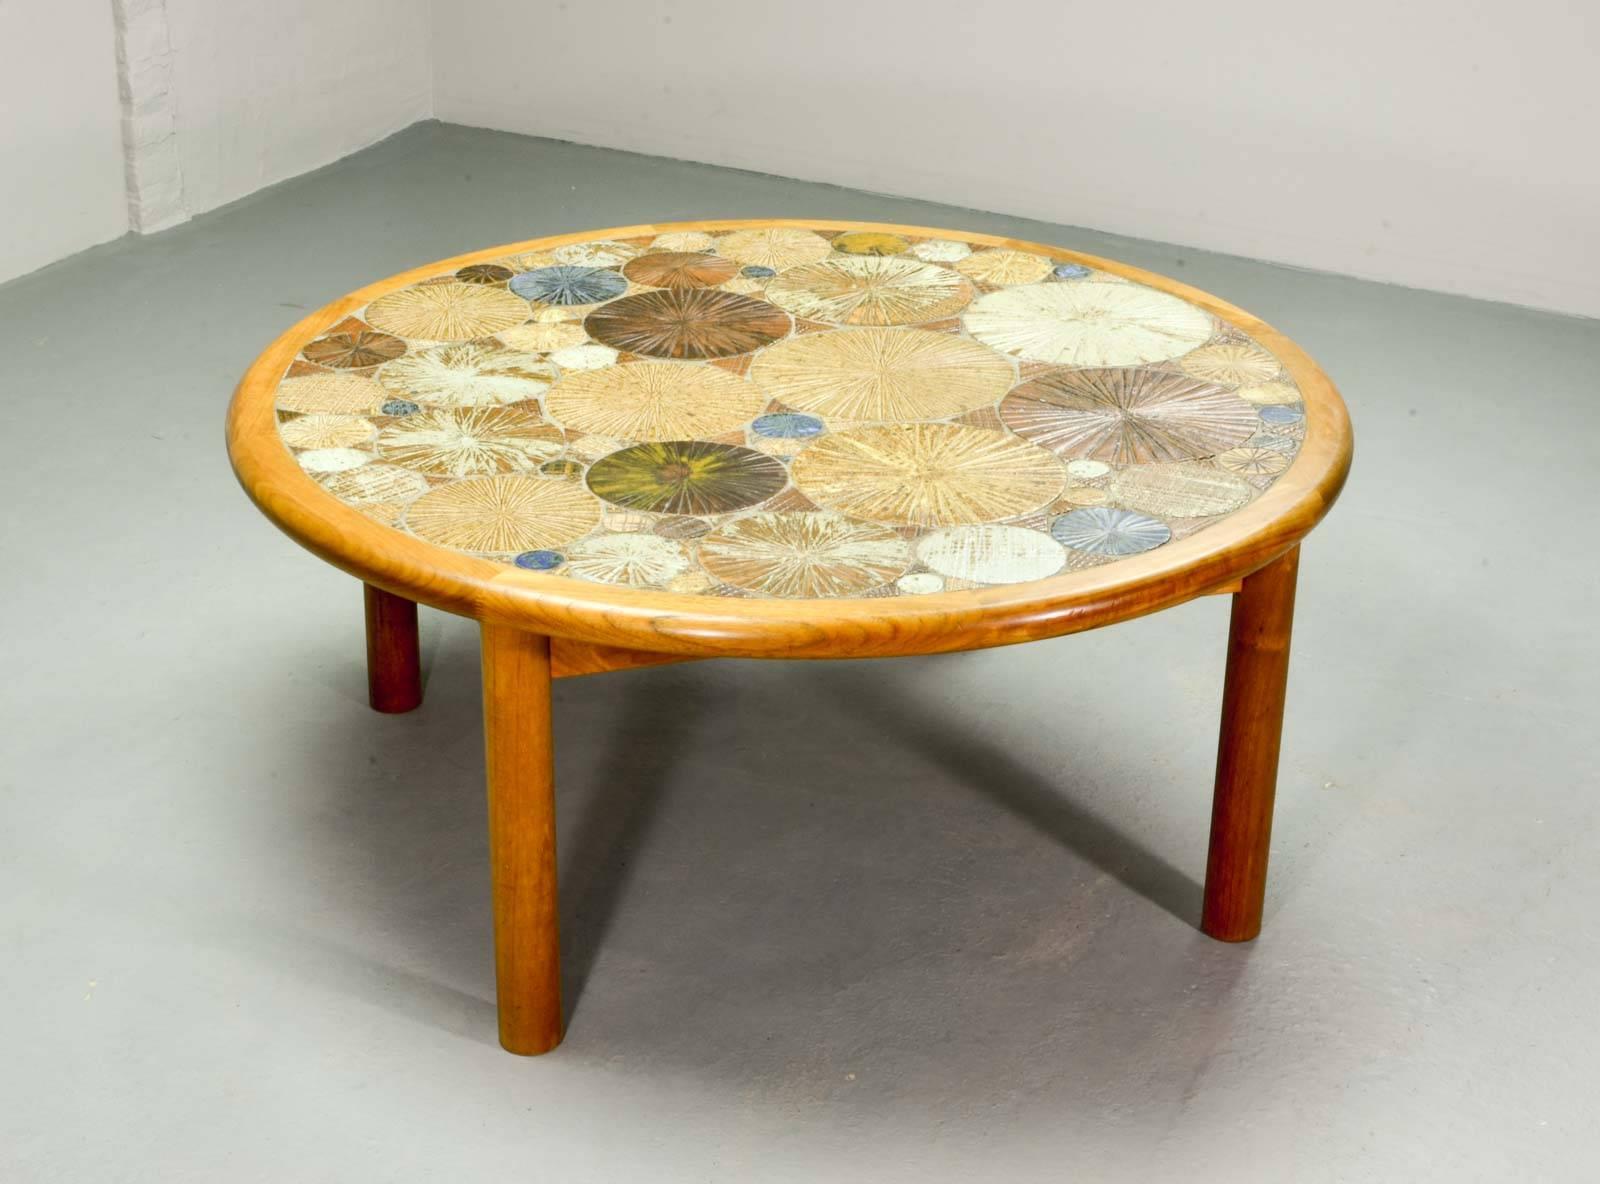 Stunning Danish coffee table by Tue Poulsen and produced by Haslev in the 1960s. The frame is made out of solid teakwood. The artistic table top is decorated with sunburst ceramic circular tiles in various sizes, set in a beautiful earthtone color